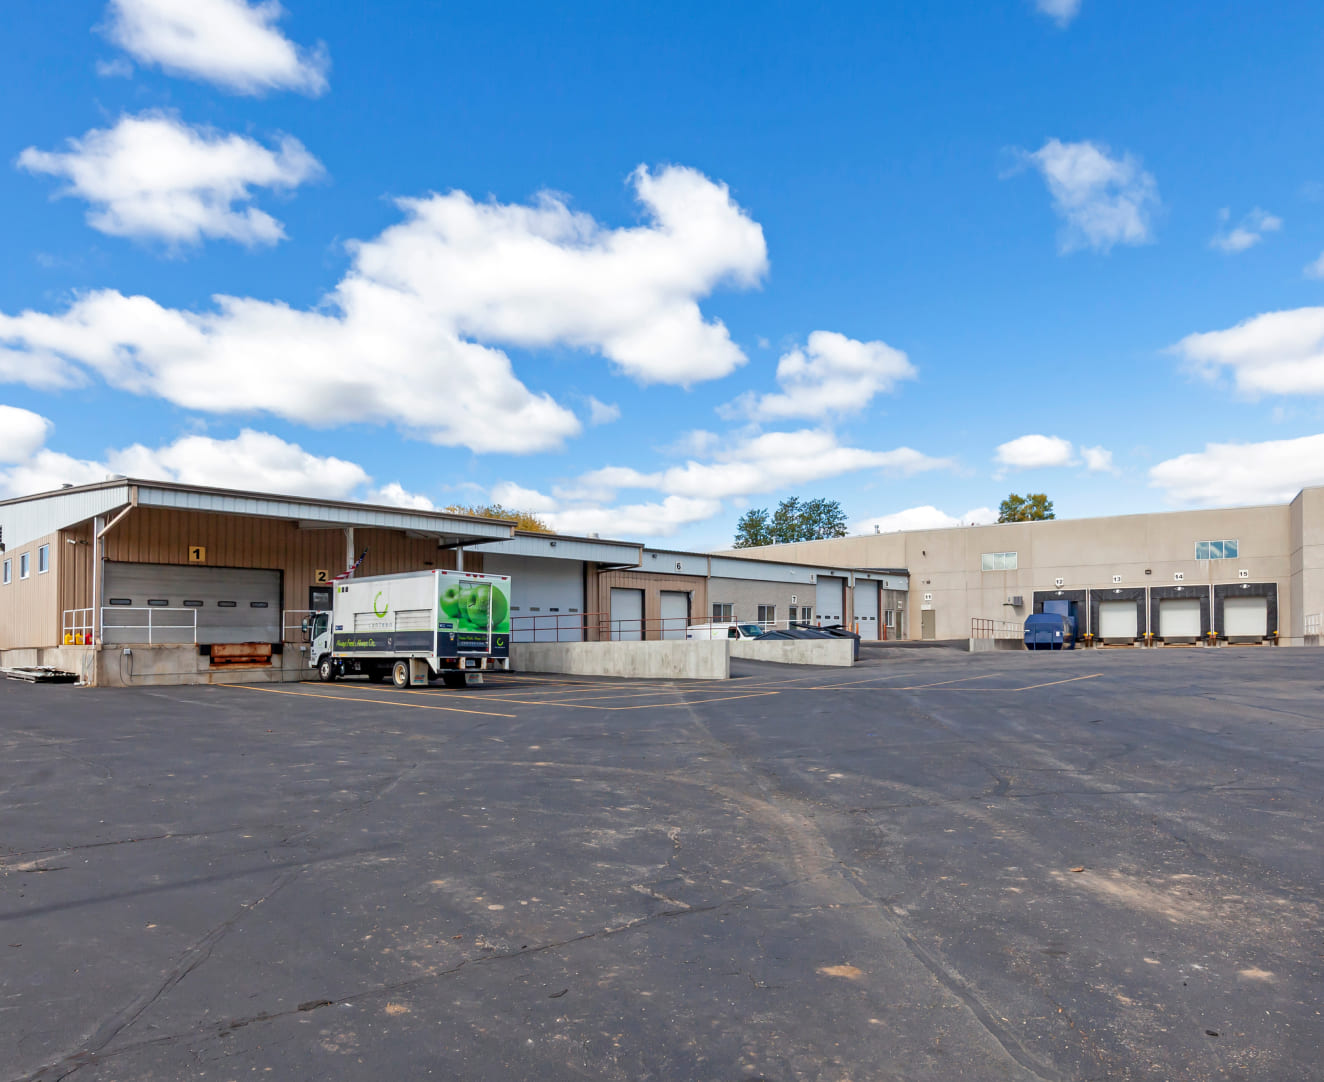 The exterior loading docks of 2250-2258 Mustang Way in Madison, WI.